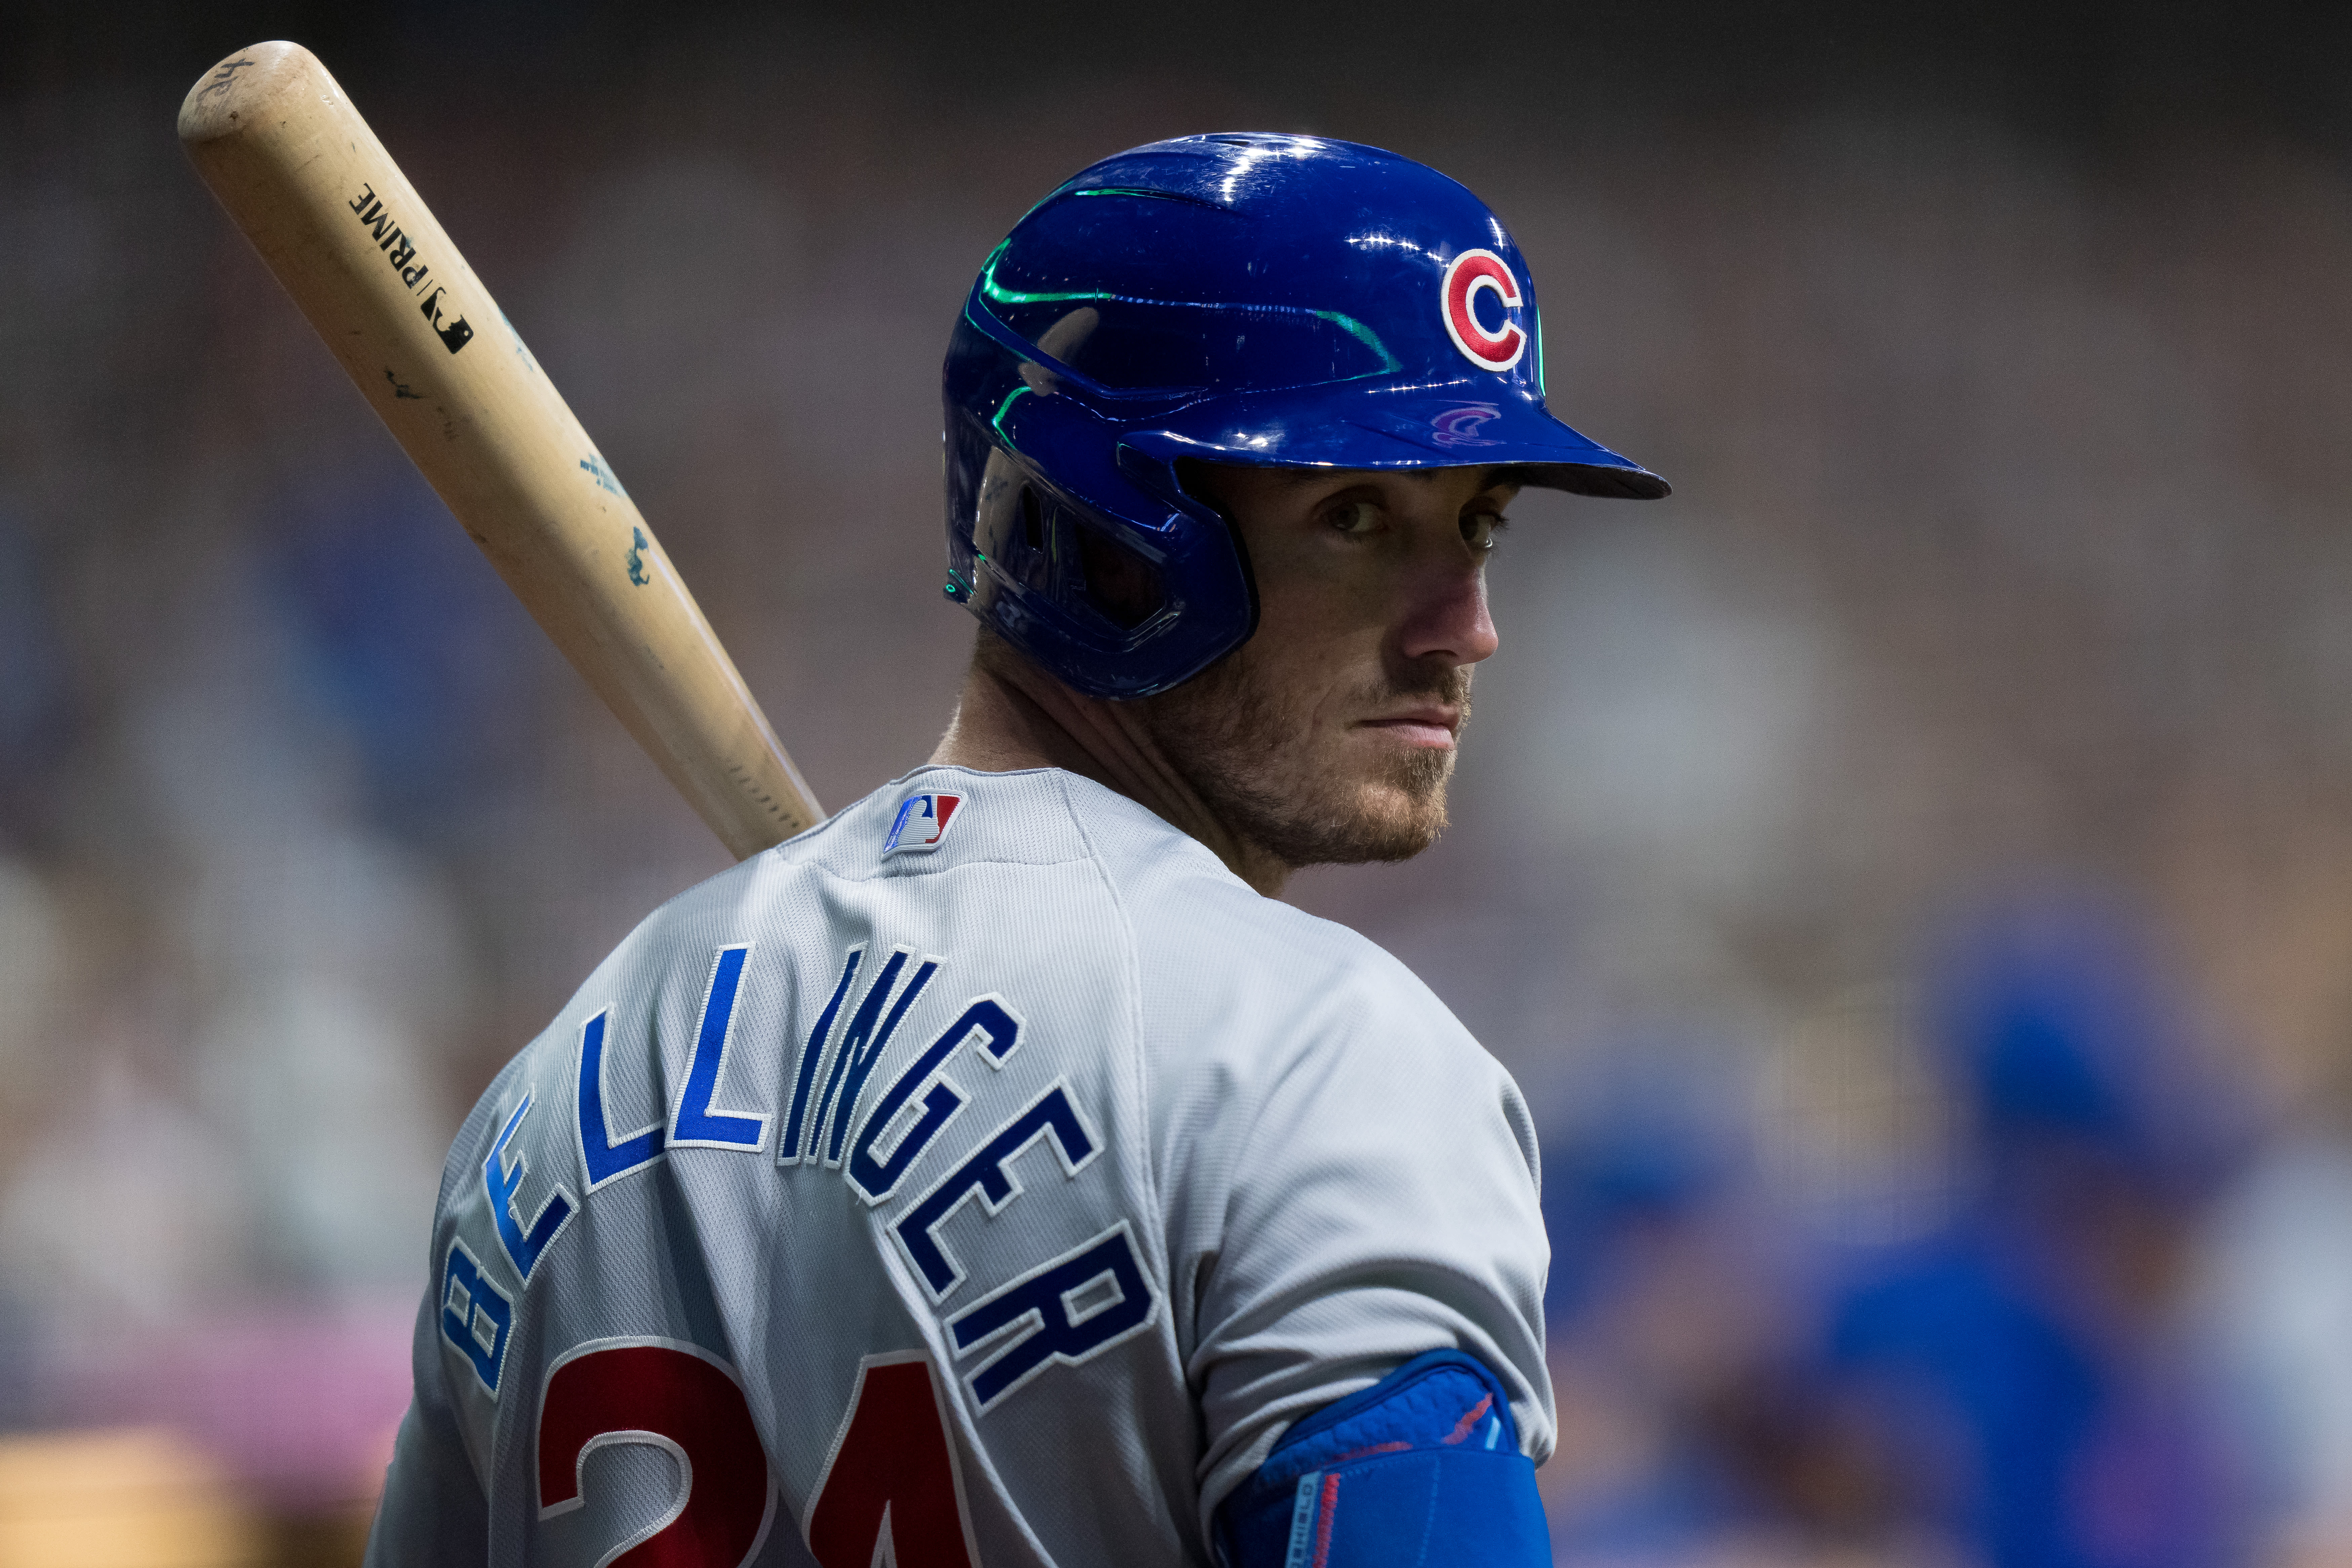 Cody Bellinger set to return from Cubs, Craig Counsell tells 670 the Score